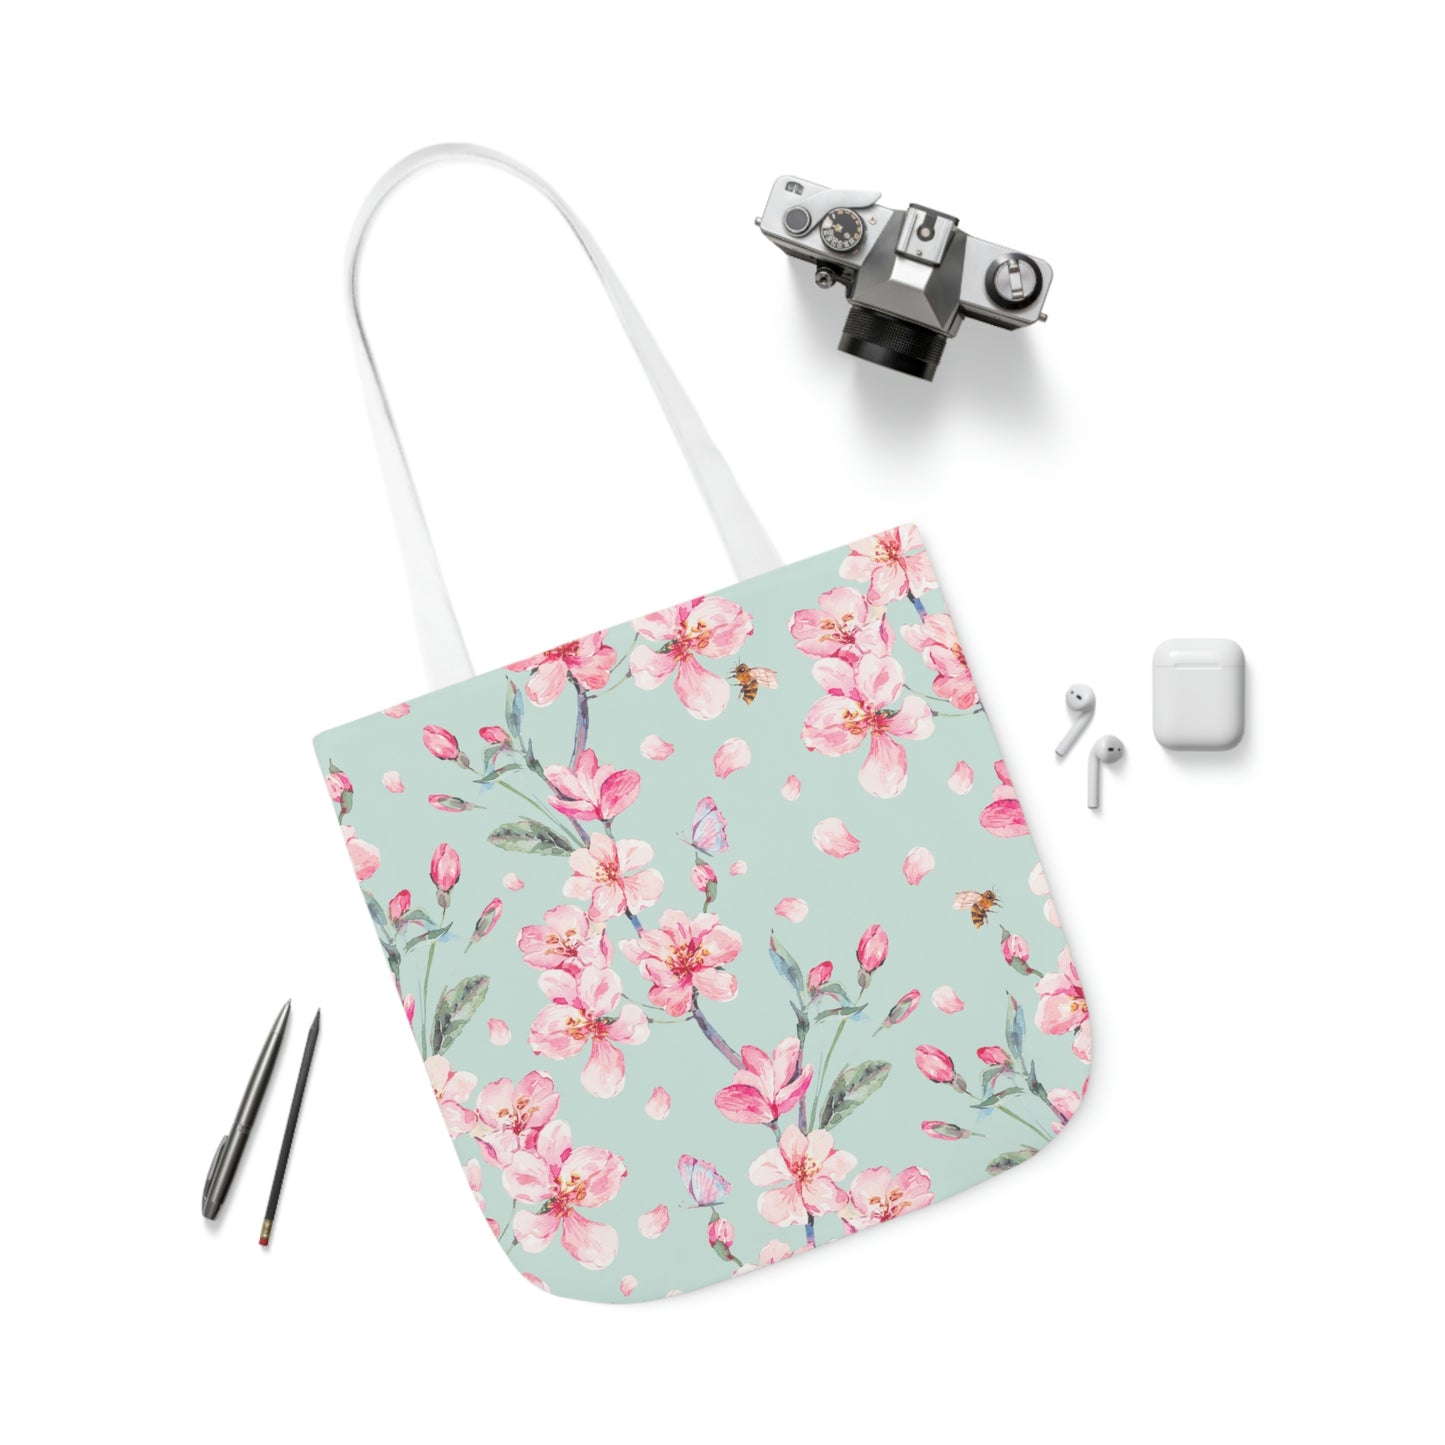 Cherry Blossoms and Honey Bees Polyester Canvas Tote Bag